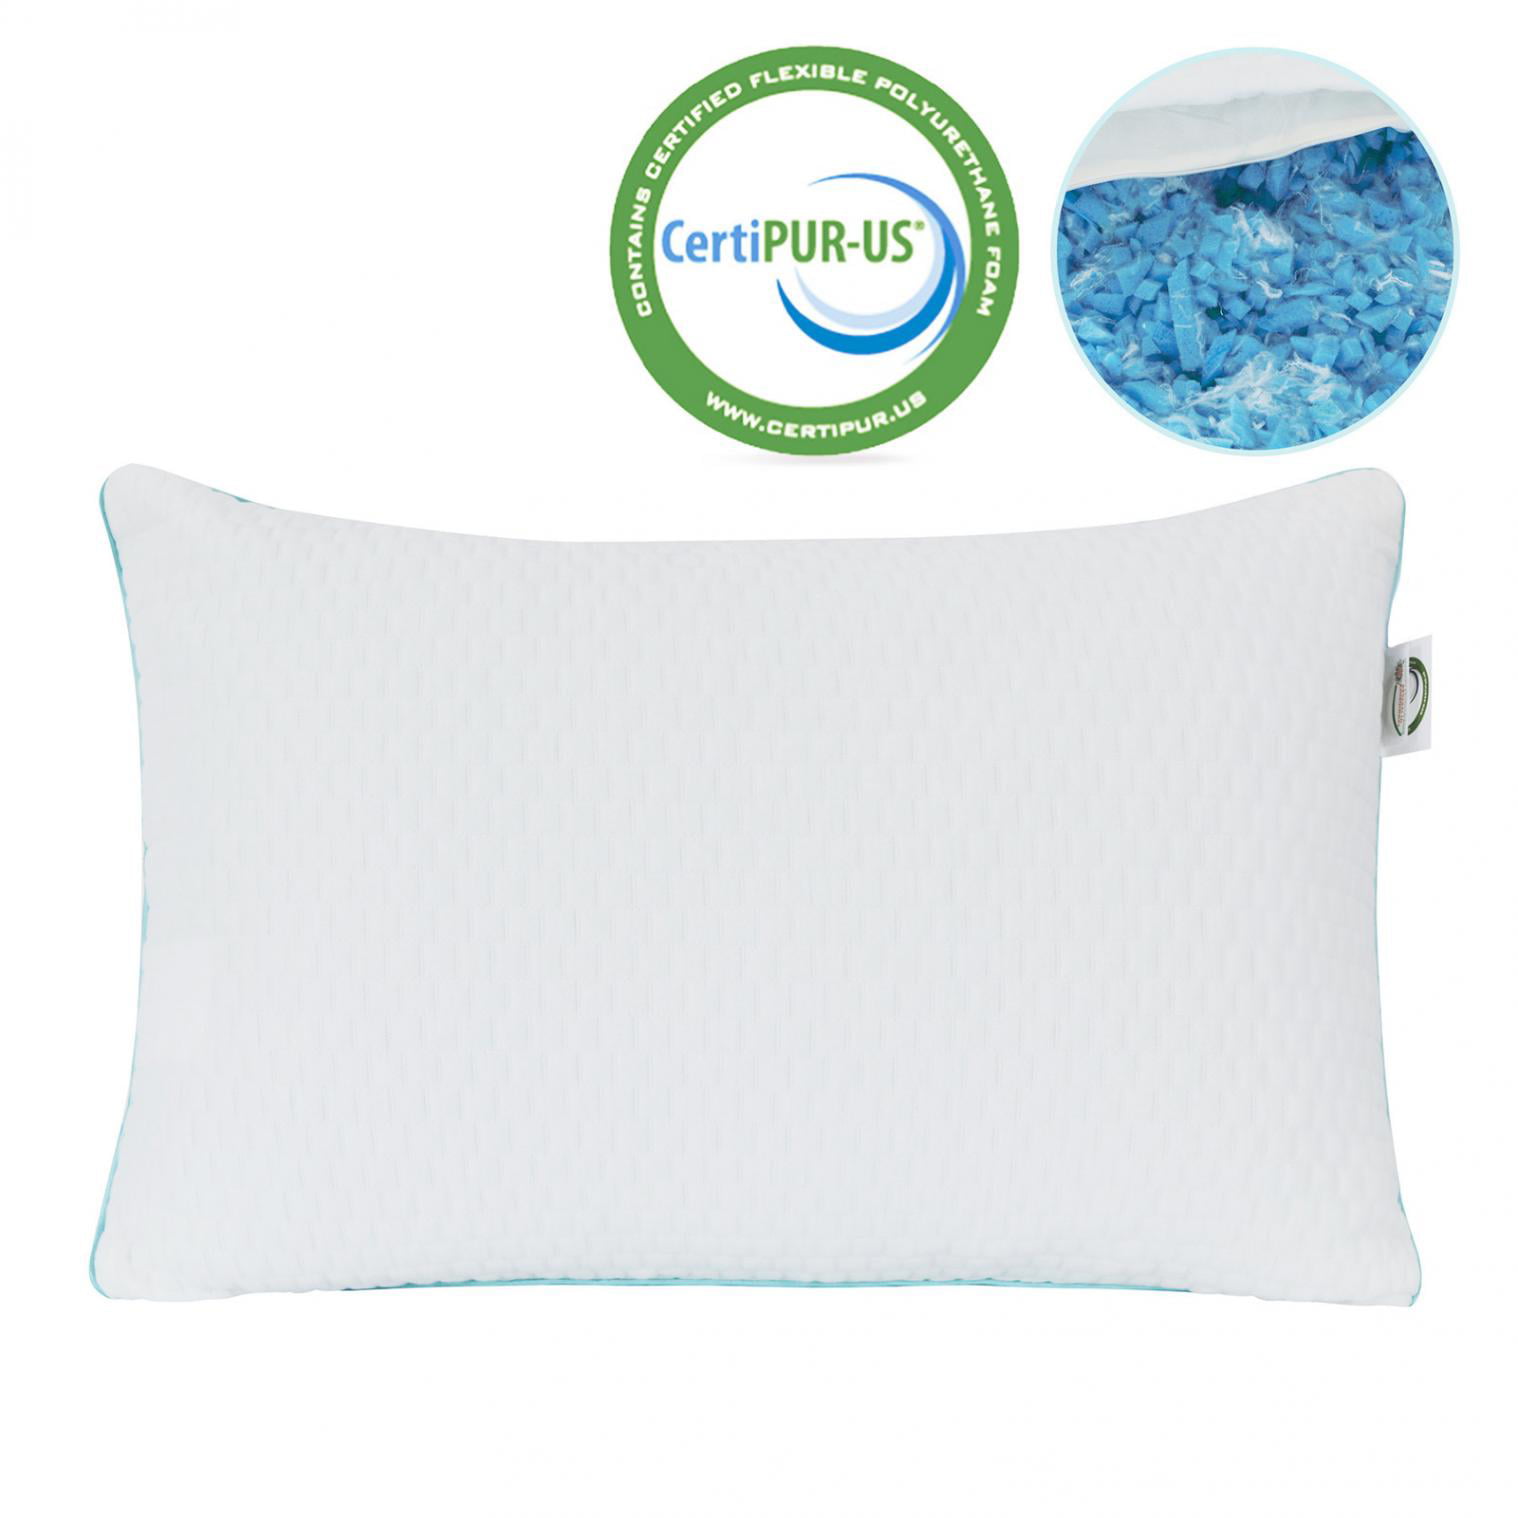 NOFFA Memory Foam Pillow with Washable Pillow Case 17" x 25" 